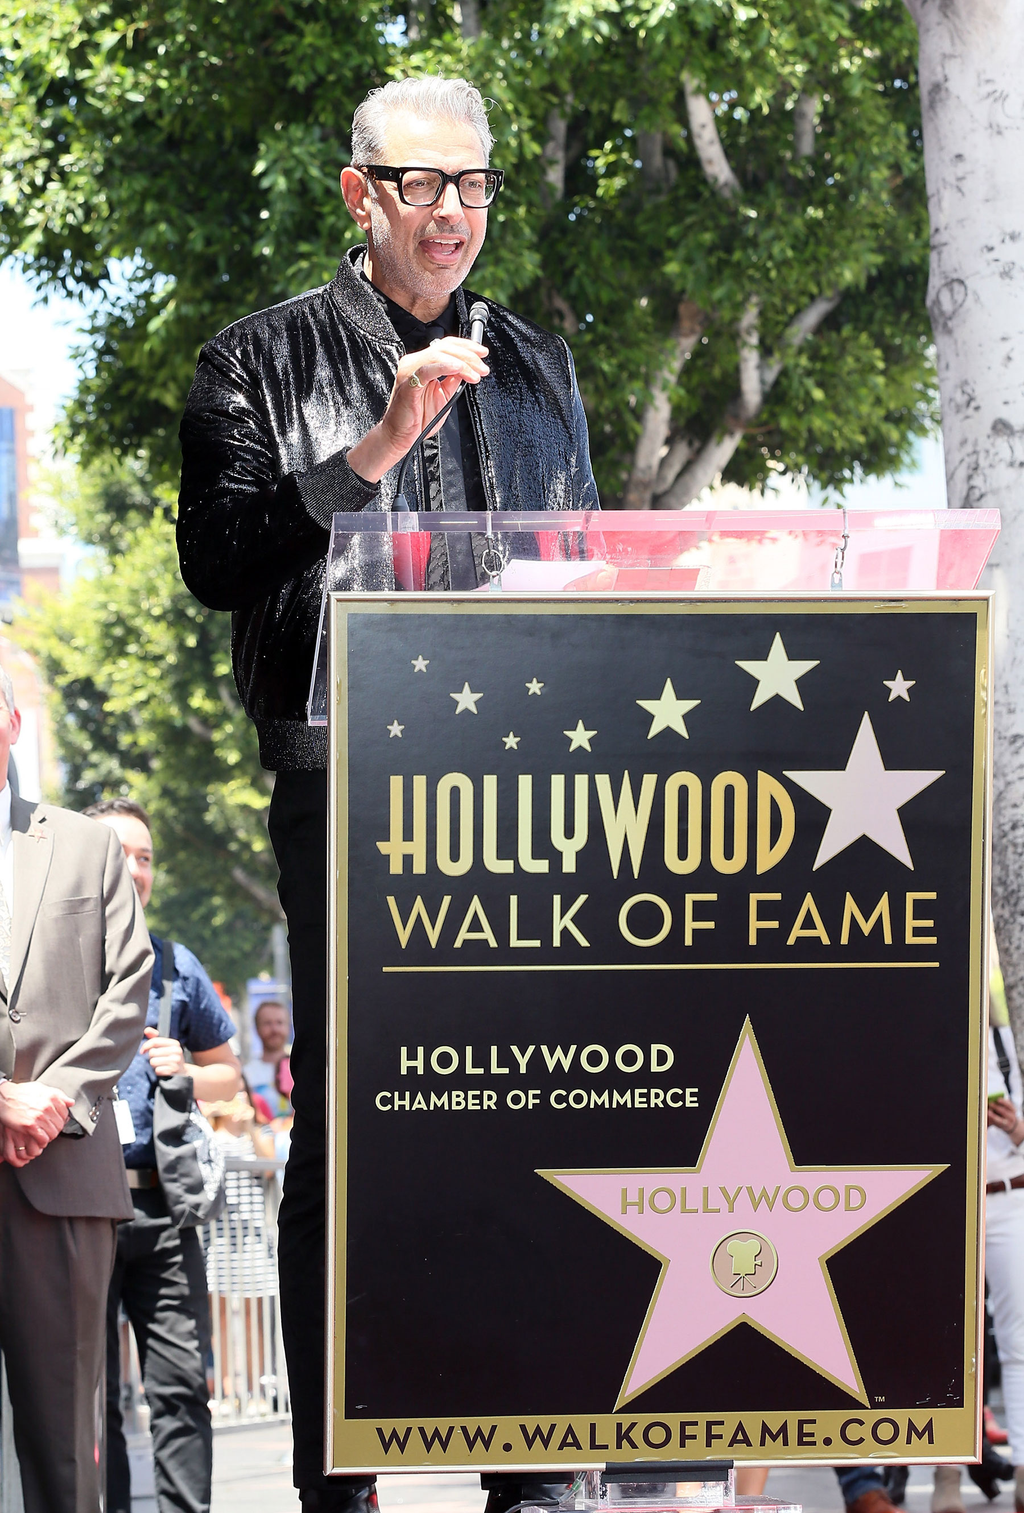 Jeff Goldblum Honored With Star On The Hollywood Walk Of Fame Arts Culture and Entertainment Celebrities Hollywood FeedRouted_NorthAmerica attends Jeff Goldblum being honored with a Star on the Hollywood Walk of Fame on June 14, 2018 in Hollywood, Califor